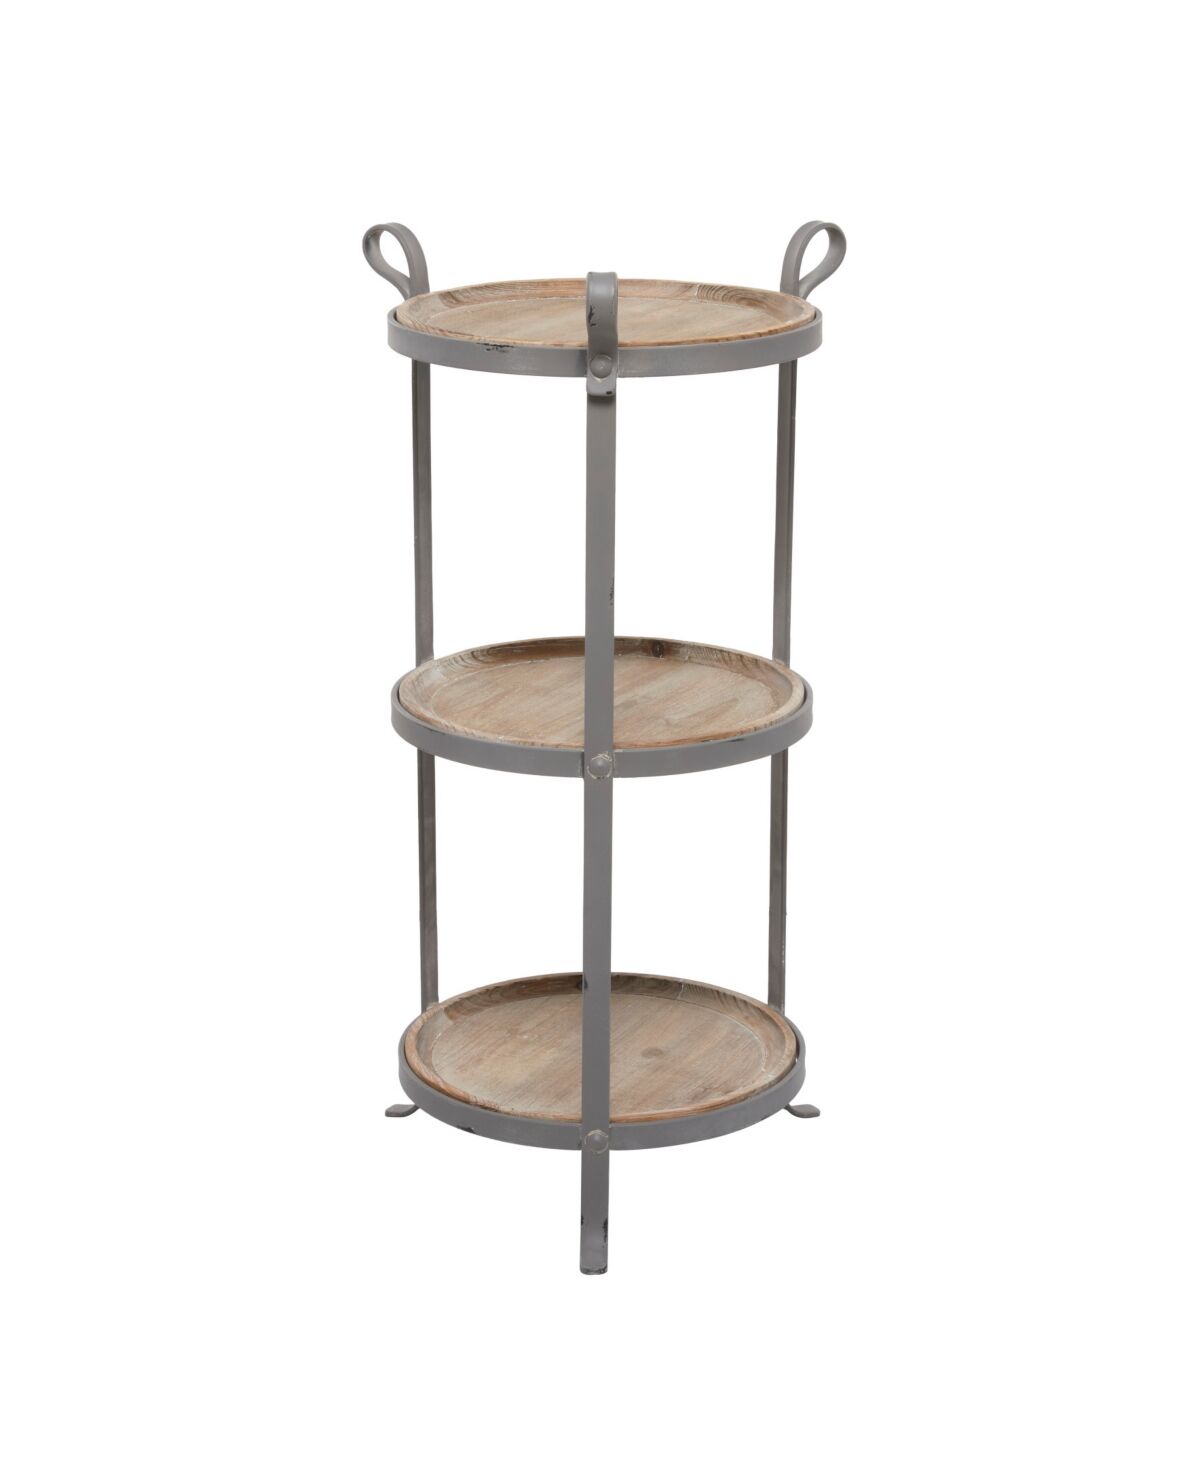 Rosemary Lane Iron Industrial Accent Table - Gray